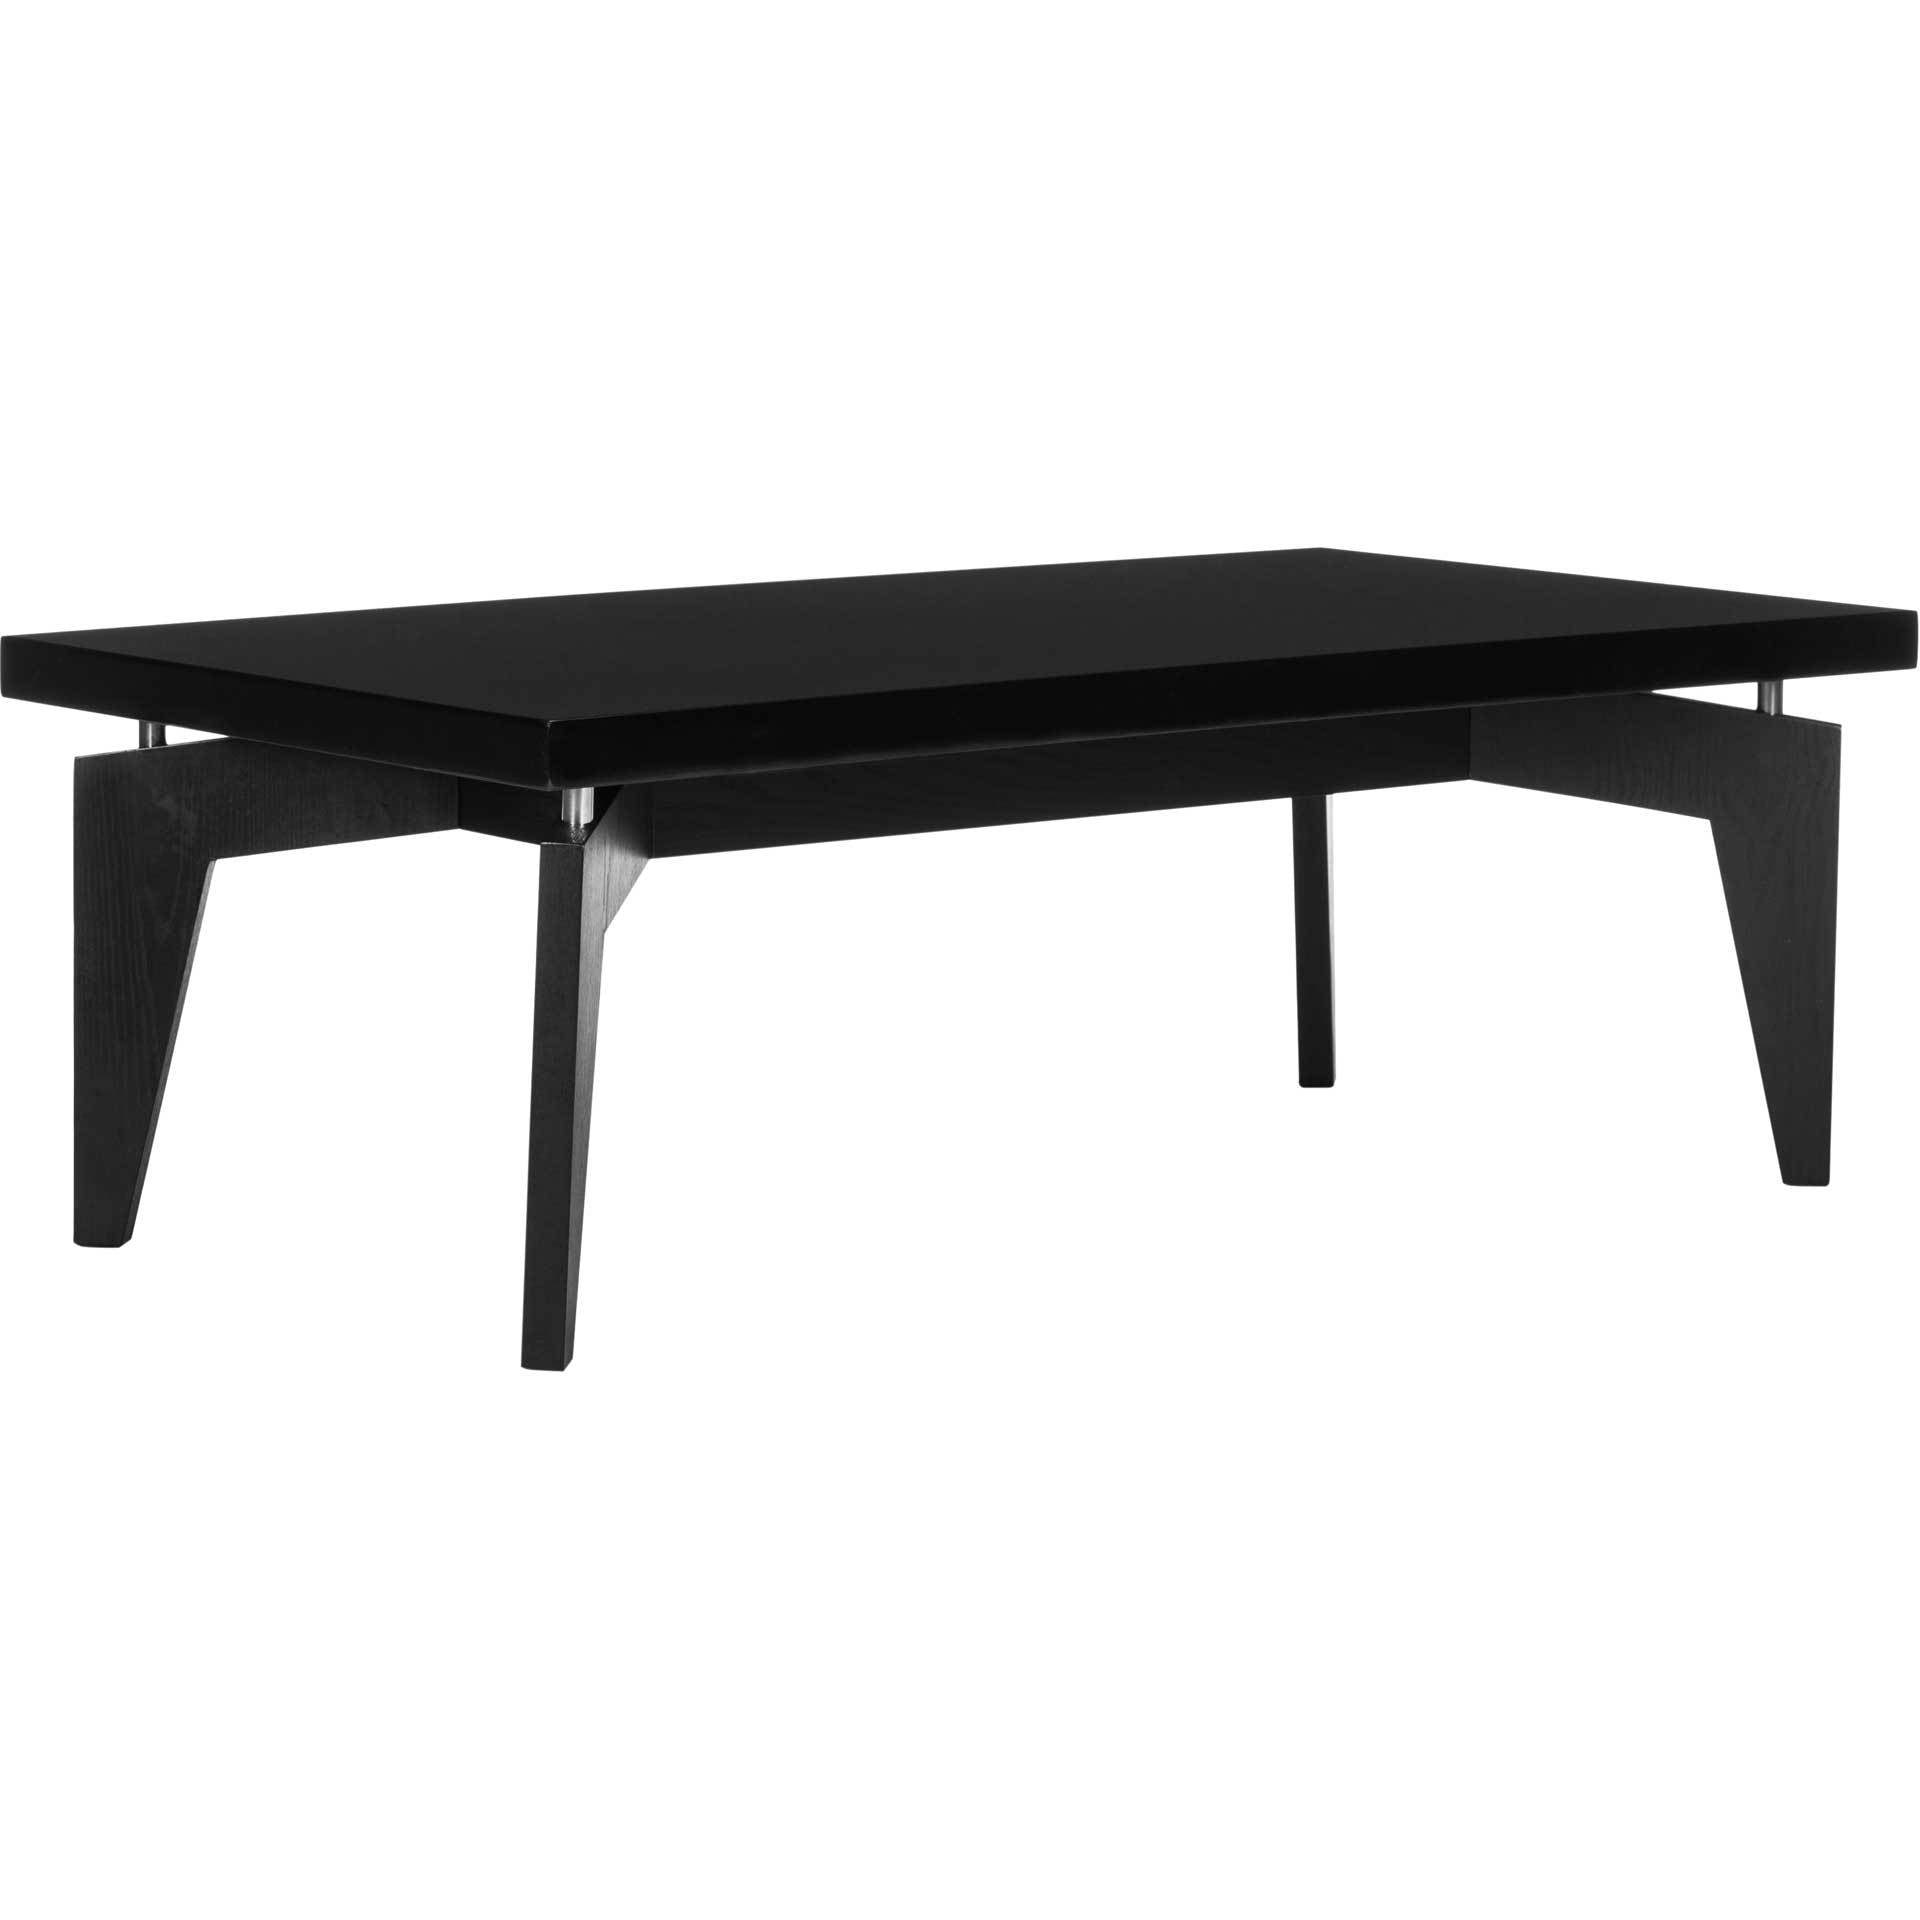 Joziah Lacquer Floating Top Coffee Table Black